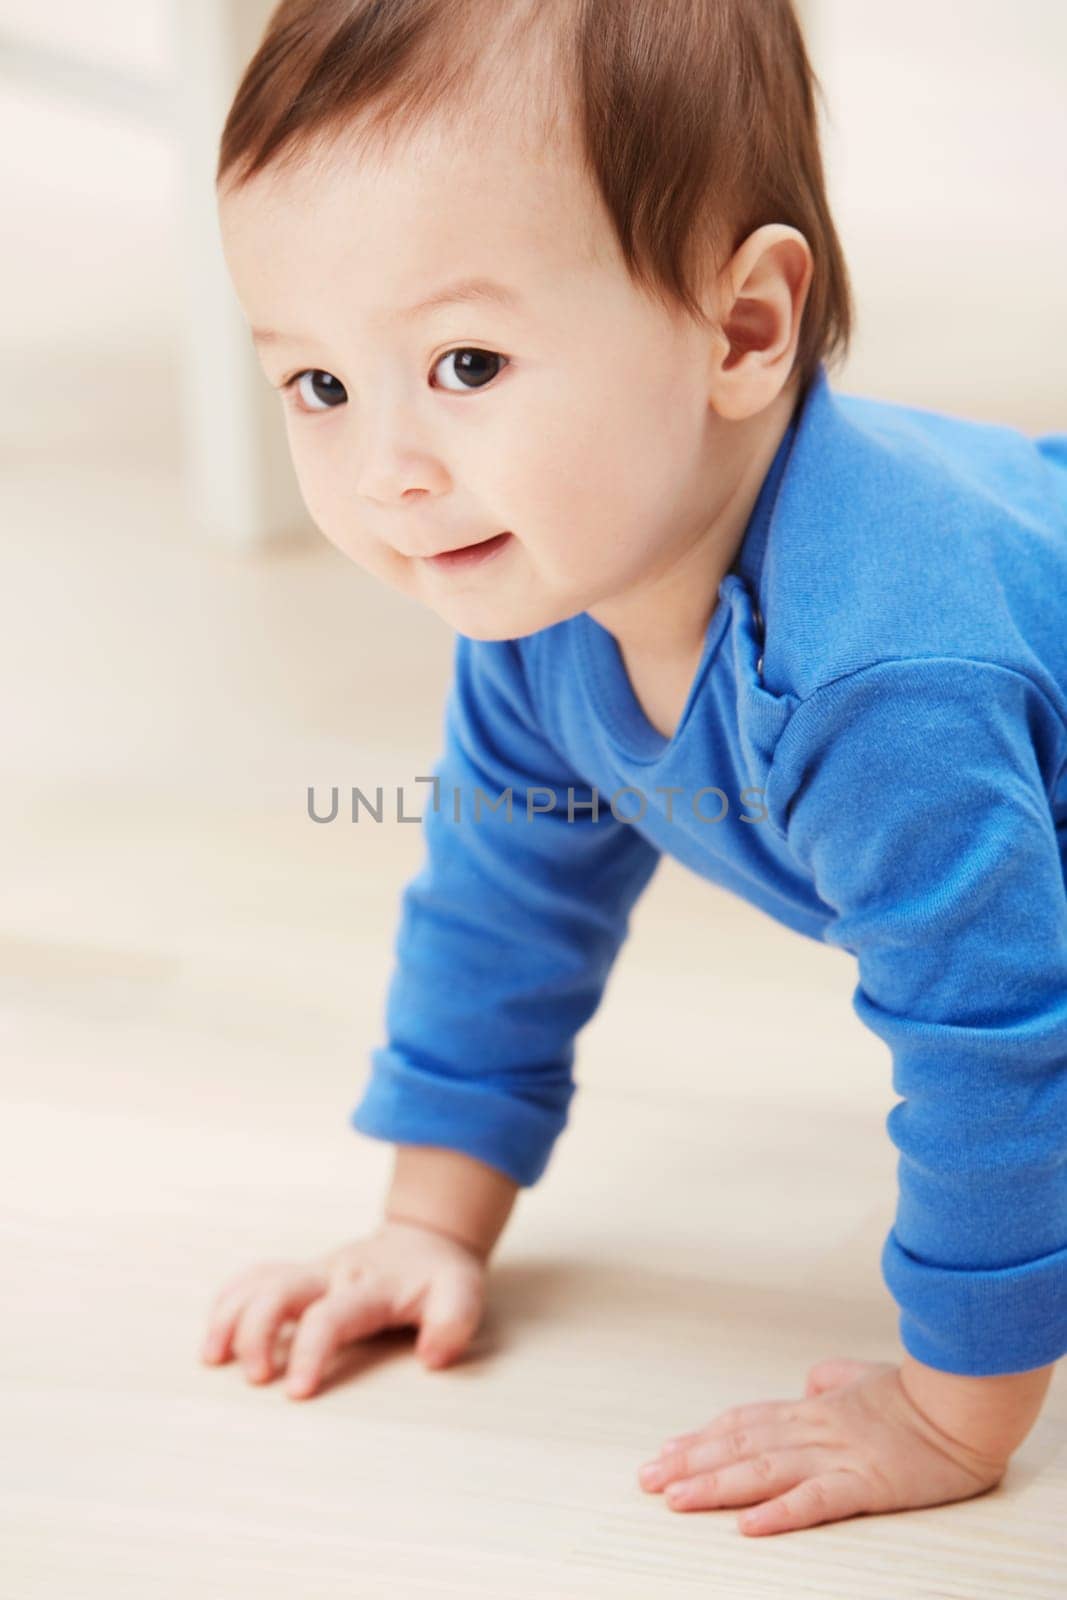 Cute, crawling and smile with baby on floor for child development, learning and youth. Young, curious and adorable with infant kid on ground of family home for growth, progress and first steps by YuriArcurs